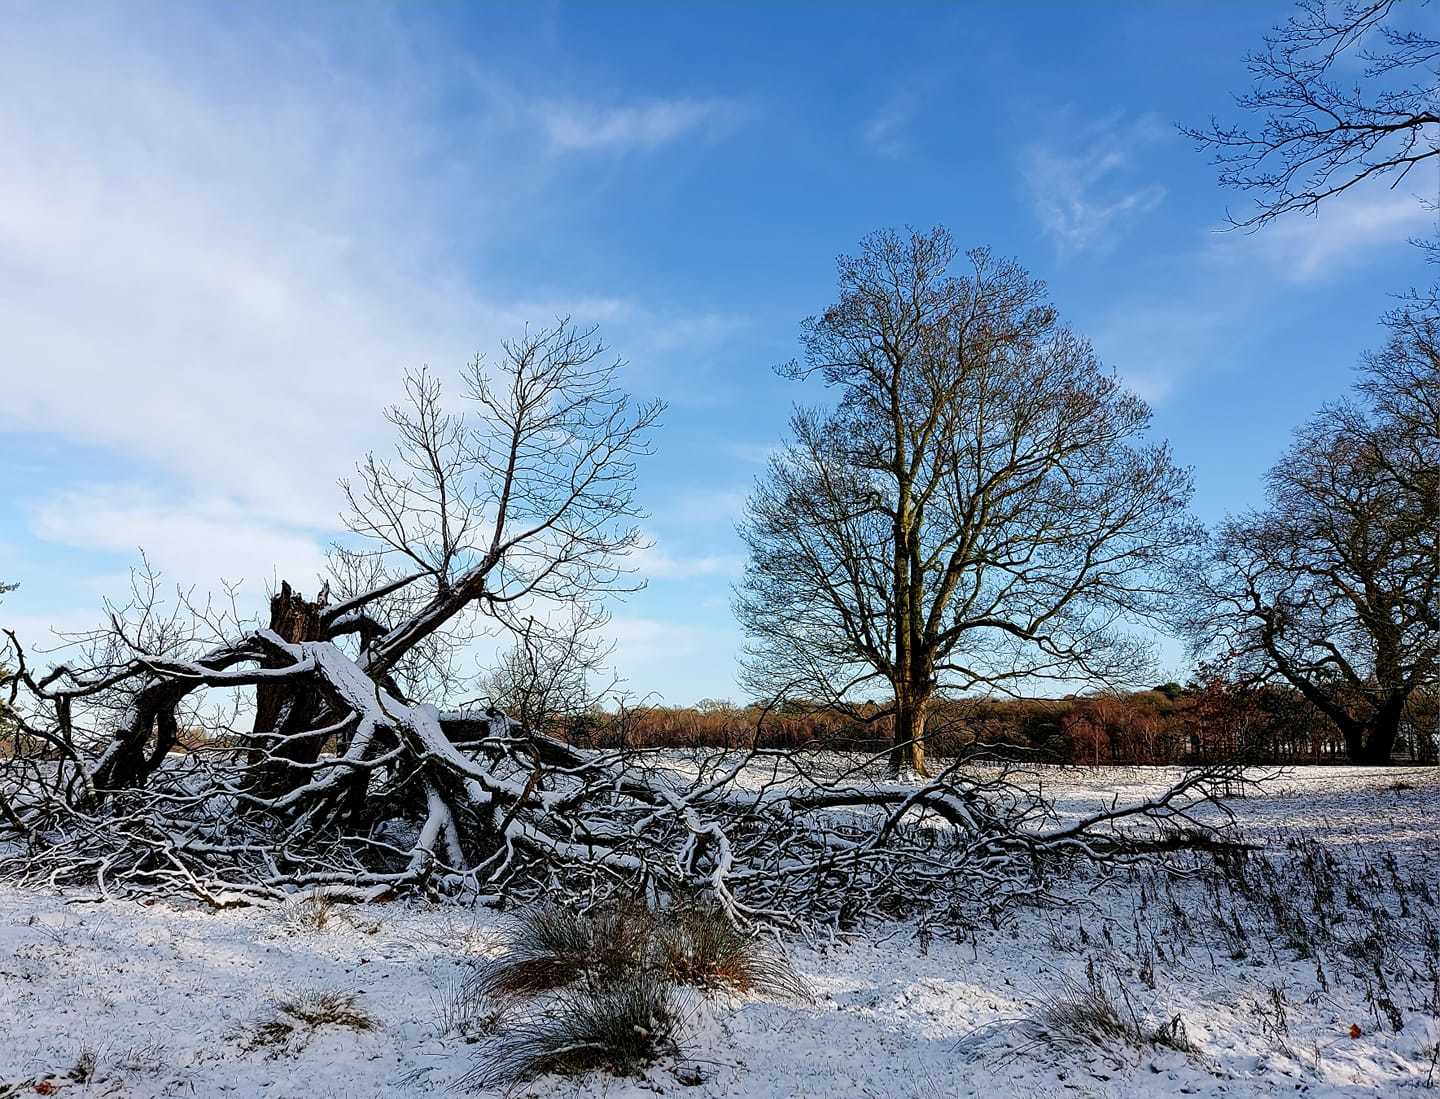 A fallen tree covered with snow in Tatton Park by Miriam Elder